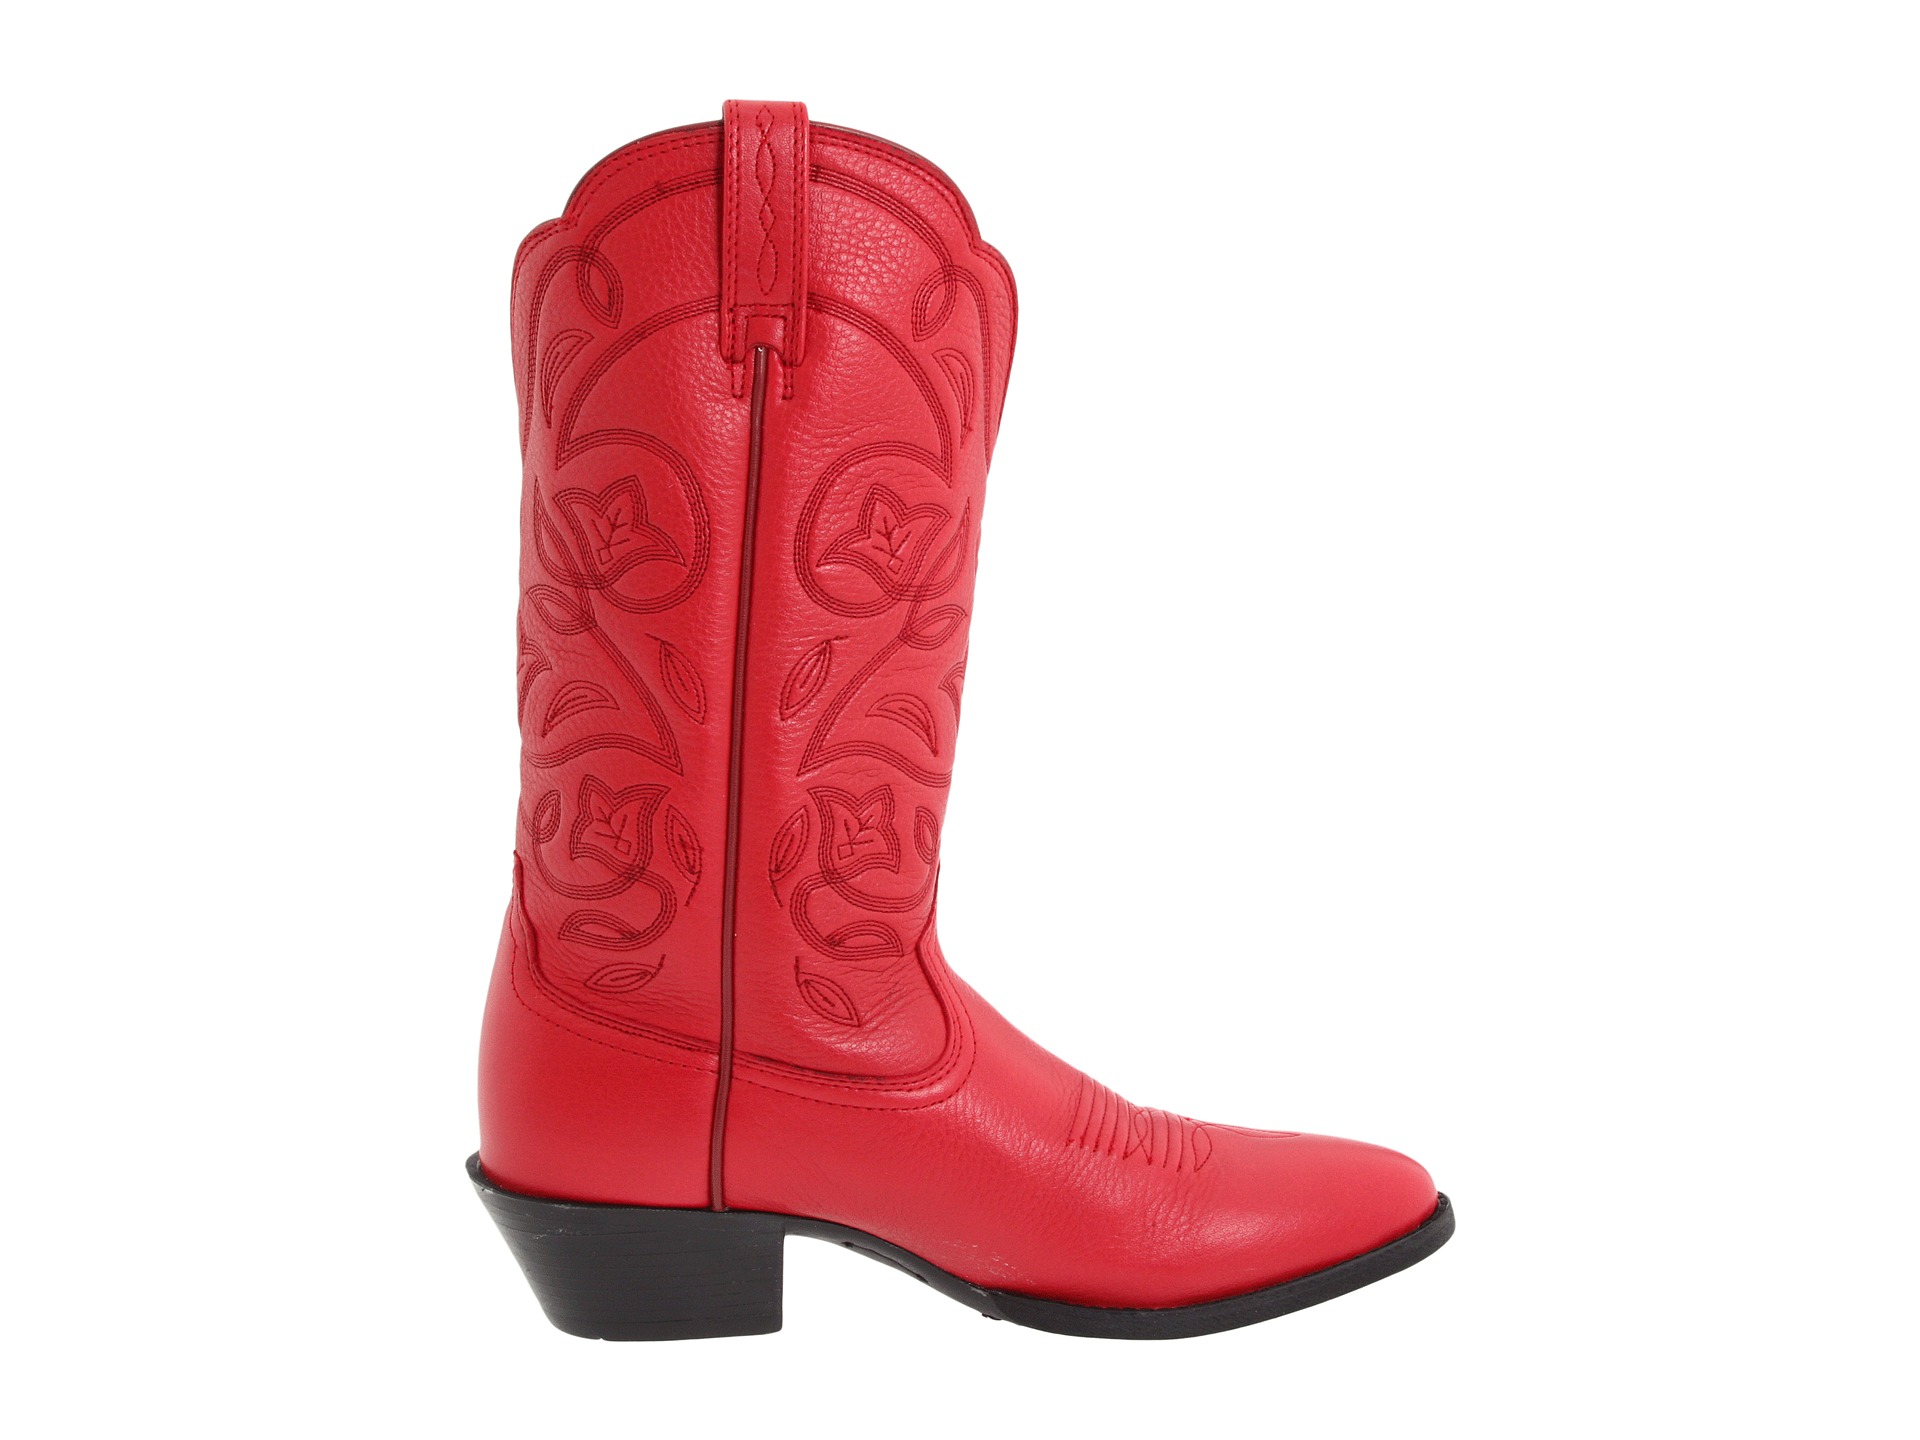 Ariat Heritage Western Boot | Shipped Free at Zappos